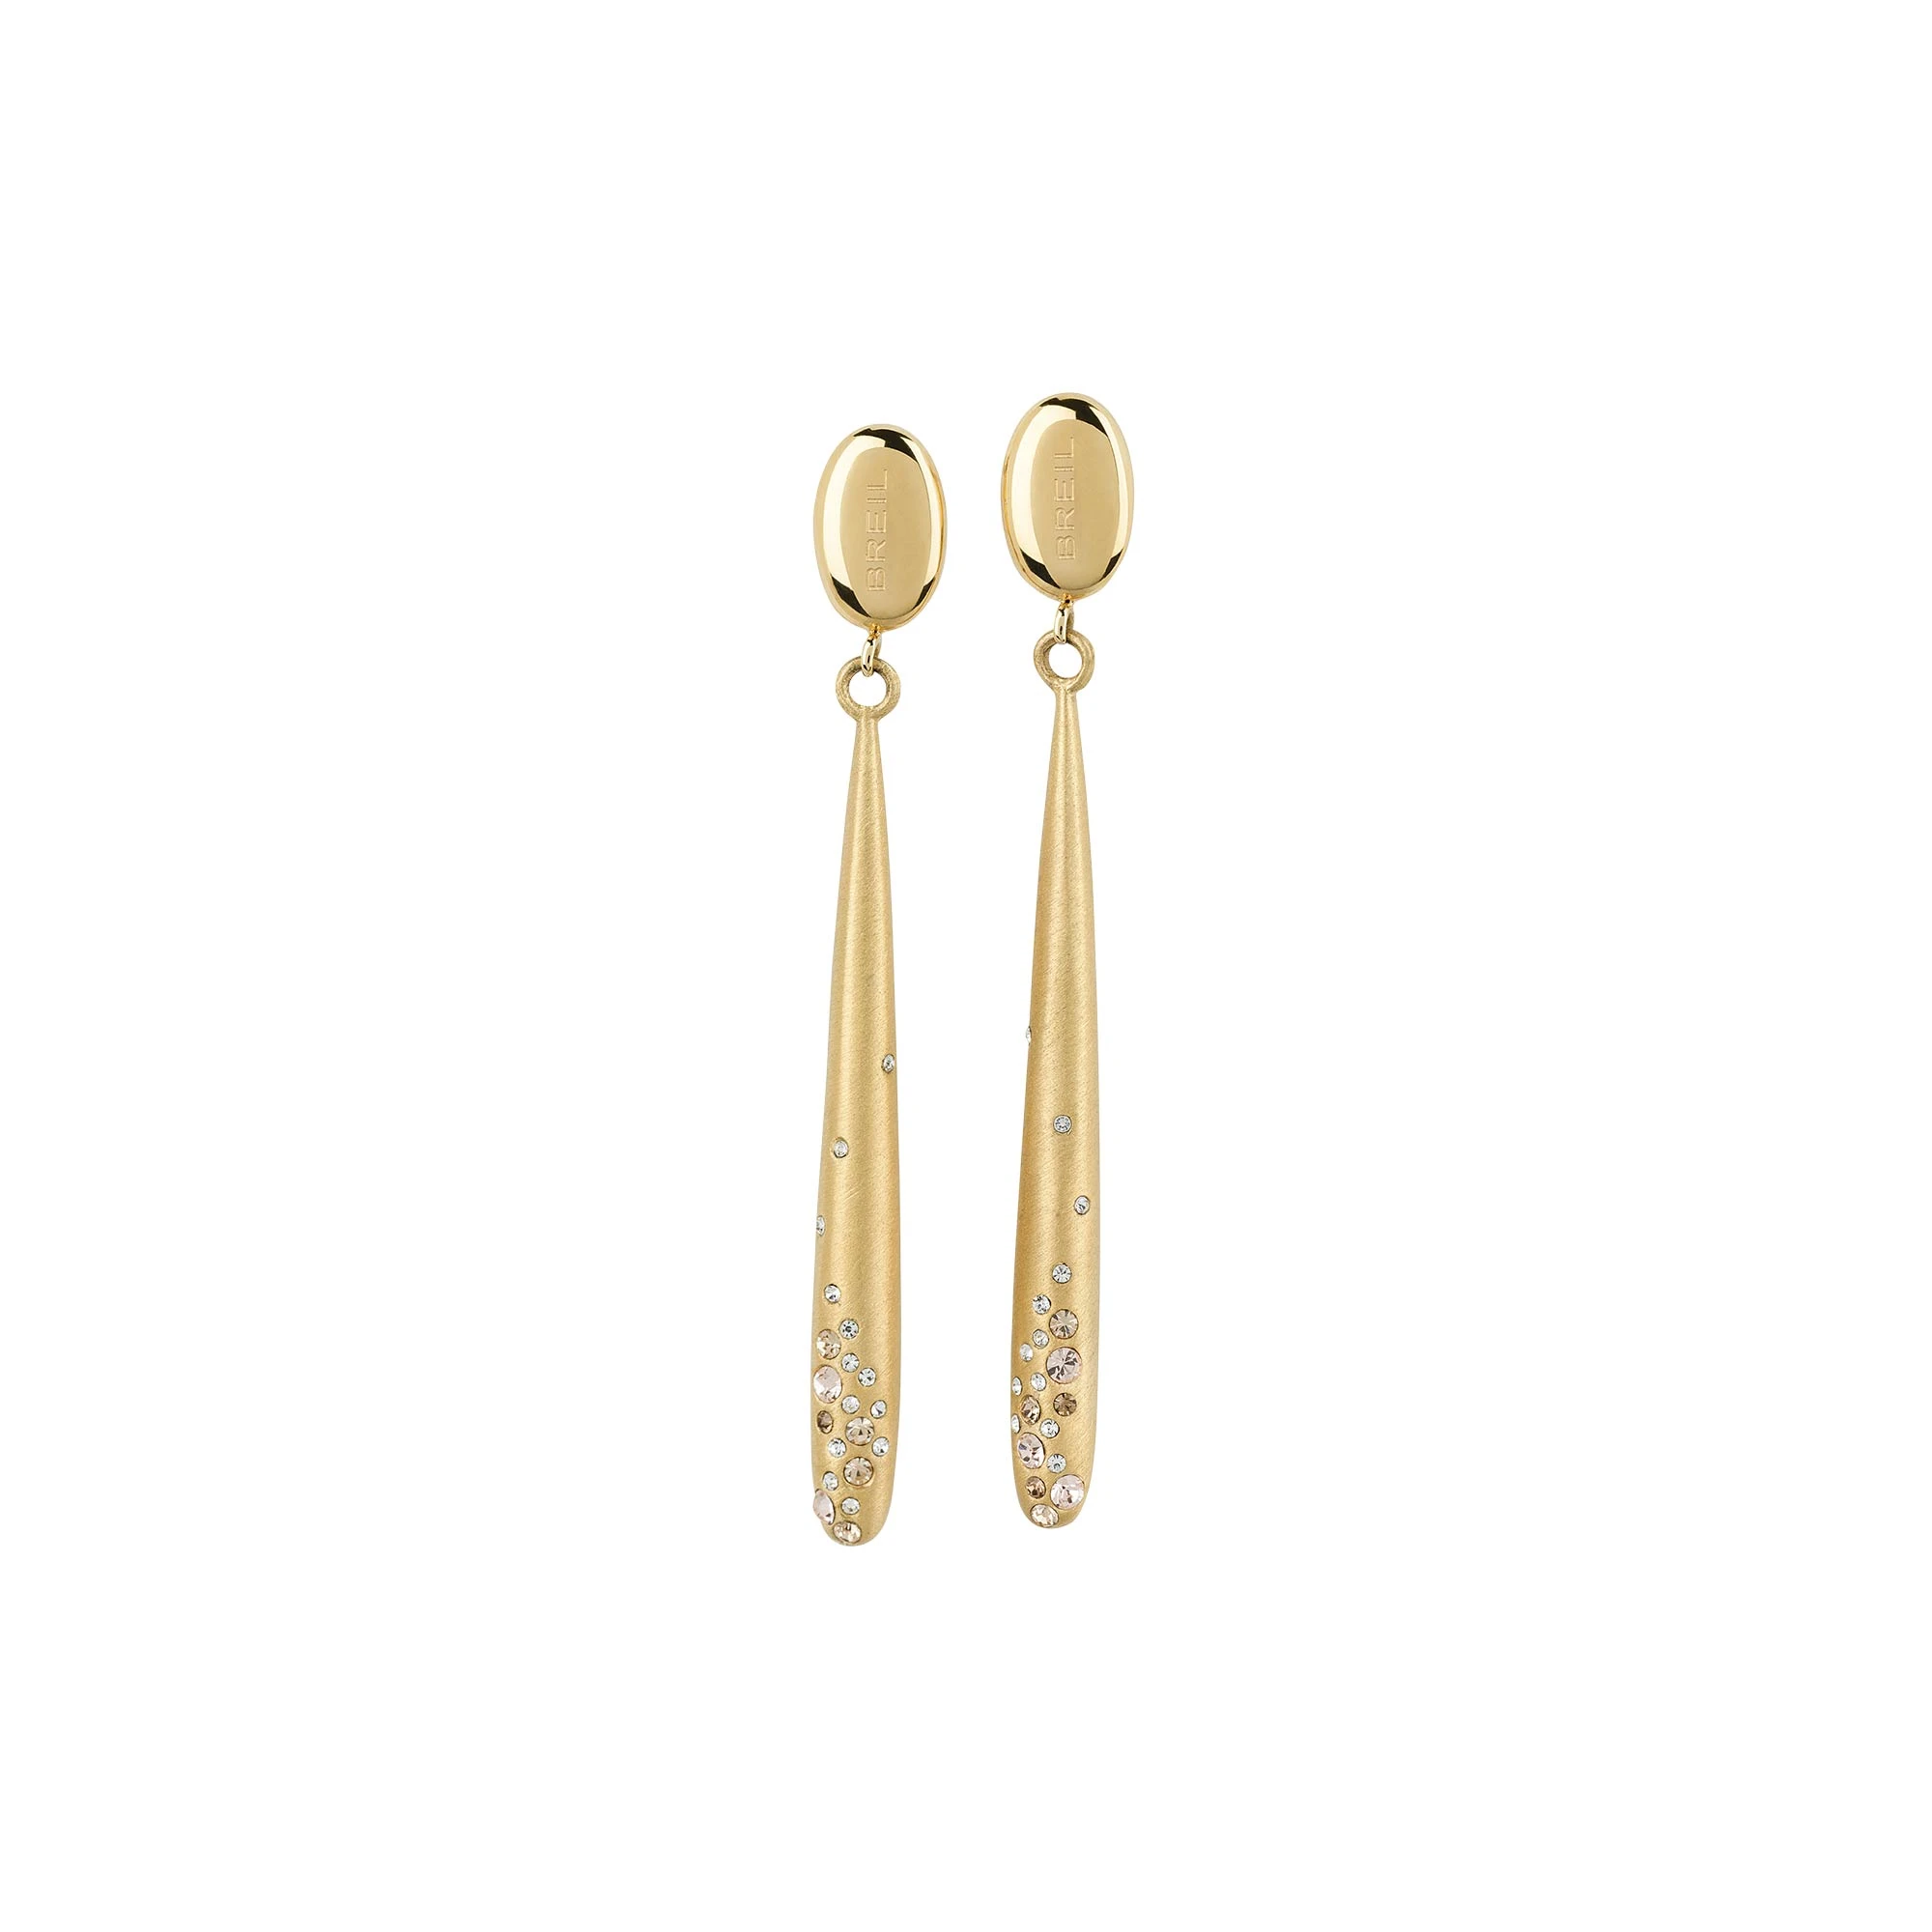 ILLUSION - DROP SHAPE SATIN IP LIGHT GOLD STAINLESS STEEL EARRINGS WITH CRYSTALS - 1 - TJ2650 | Breil